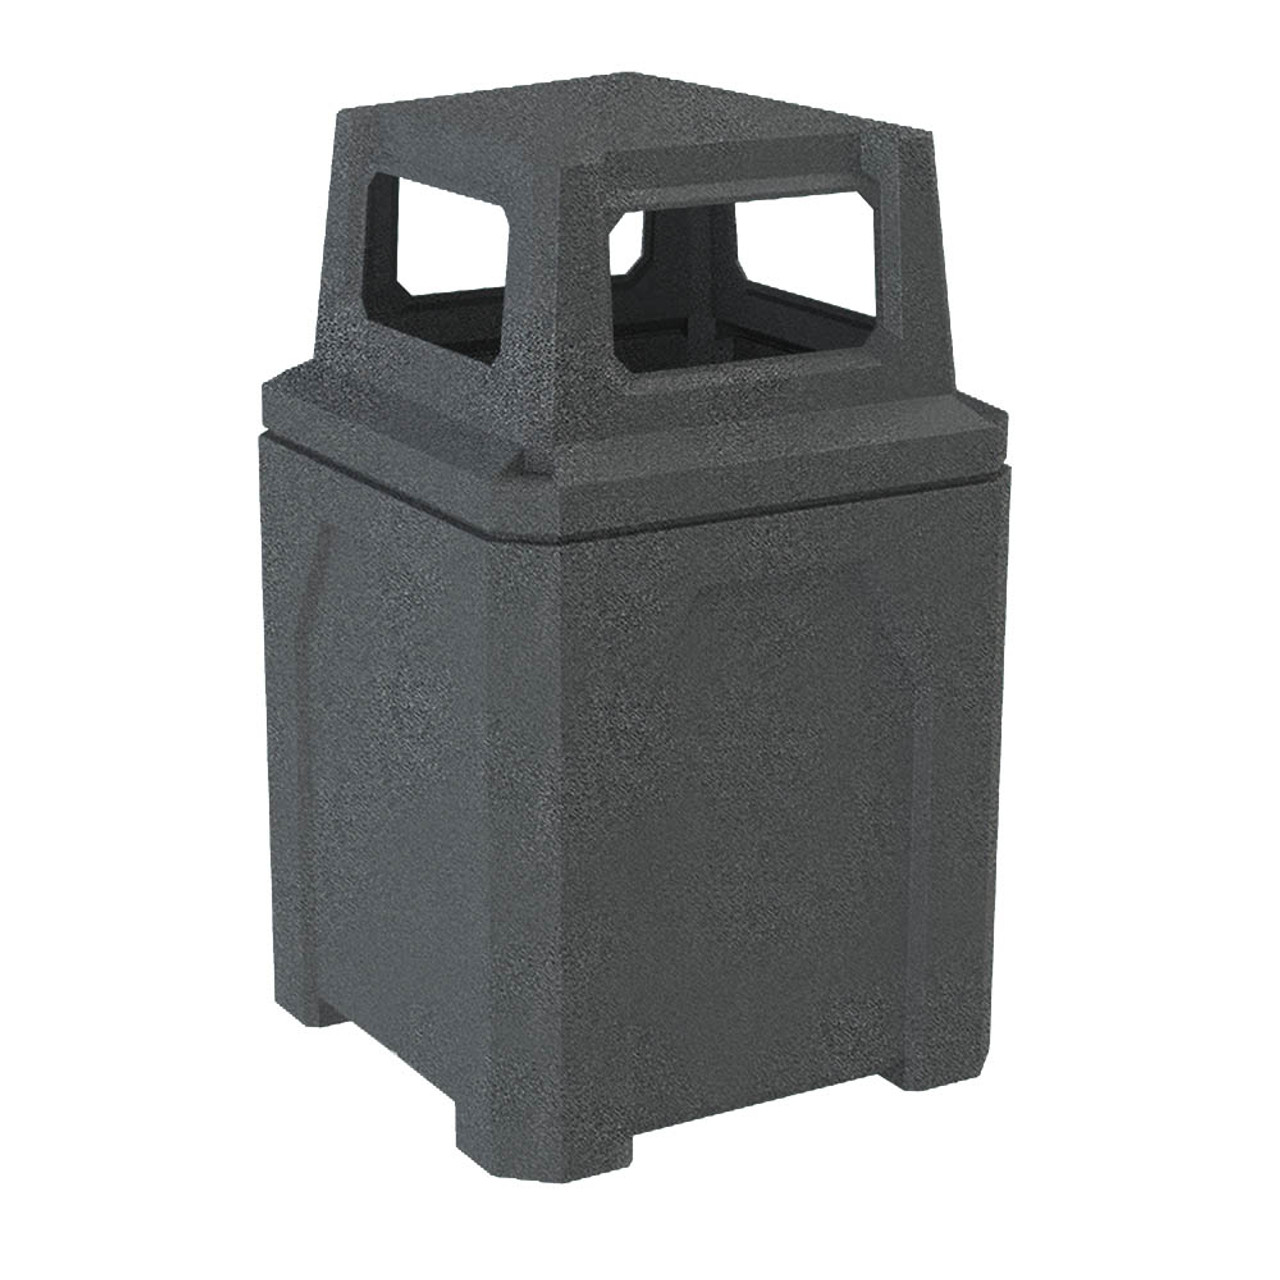 52 Gallon Kolor Can Square 4 Way Open Lid Waste Receptacle S7301A-00 DARK GRANITE